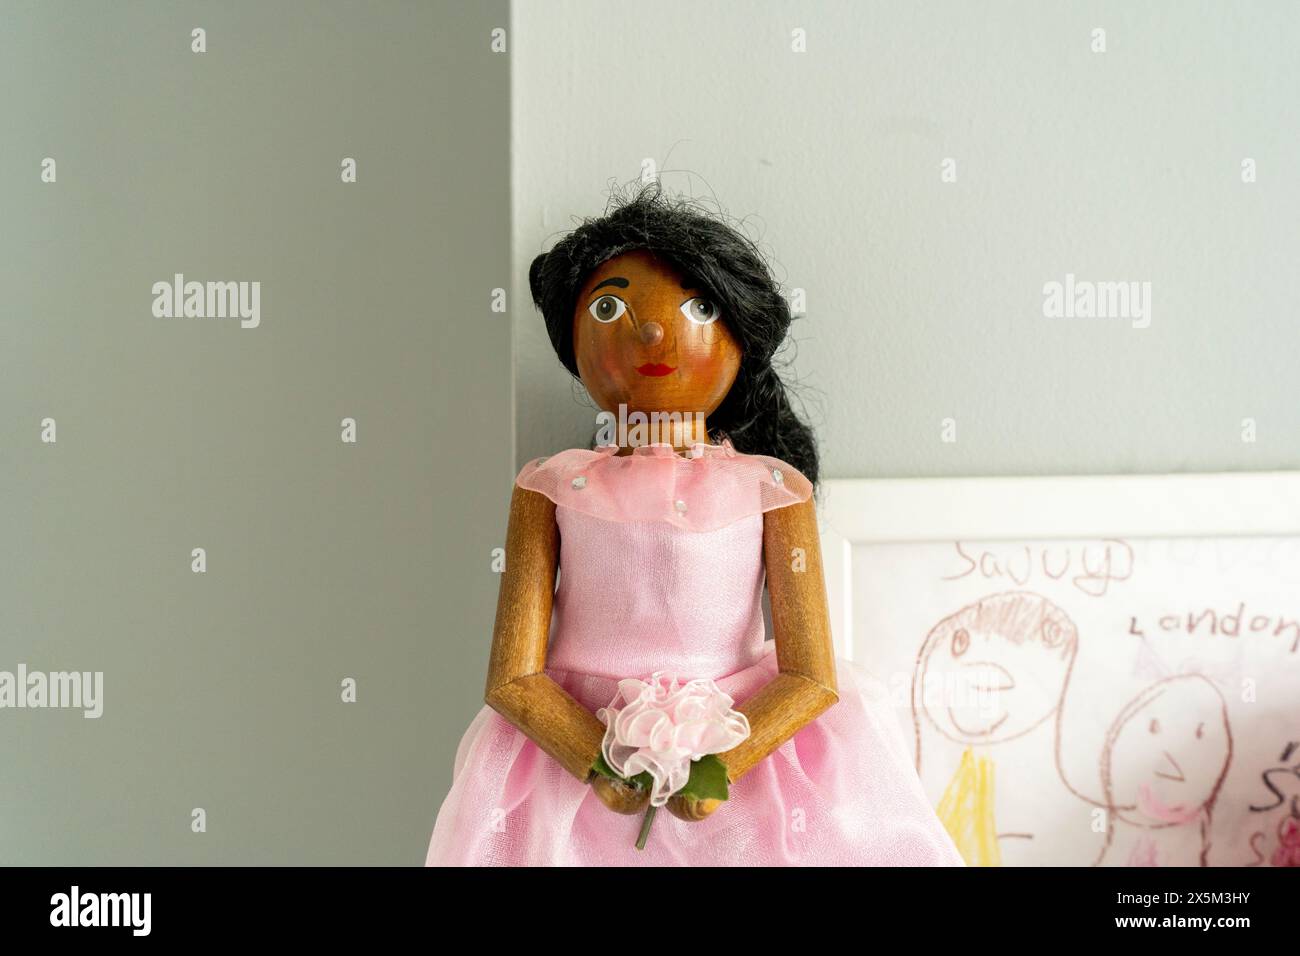 Wooden doll in pink dress Stock Photo